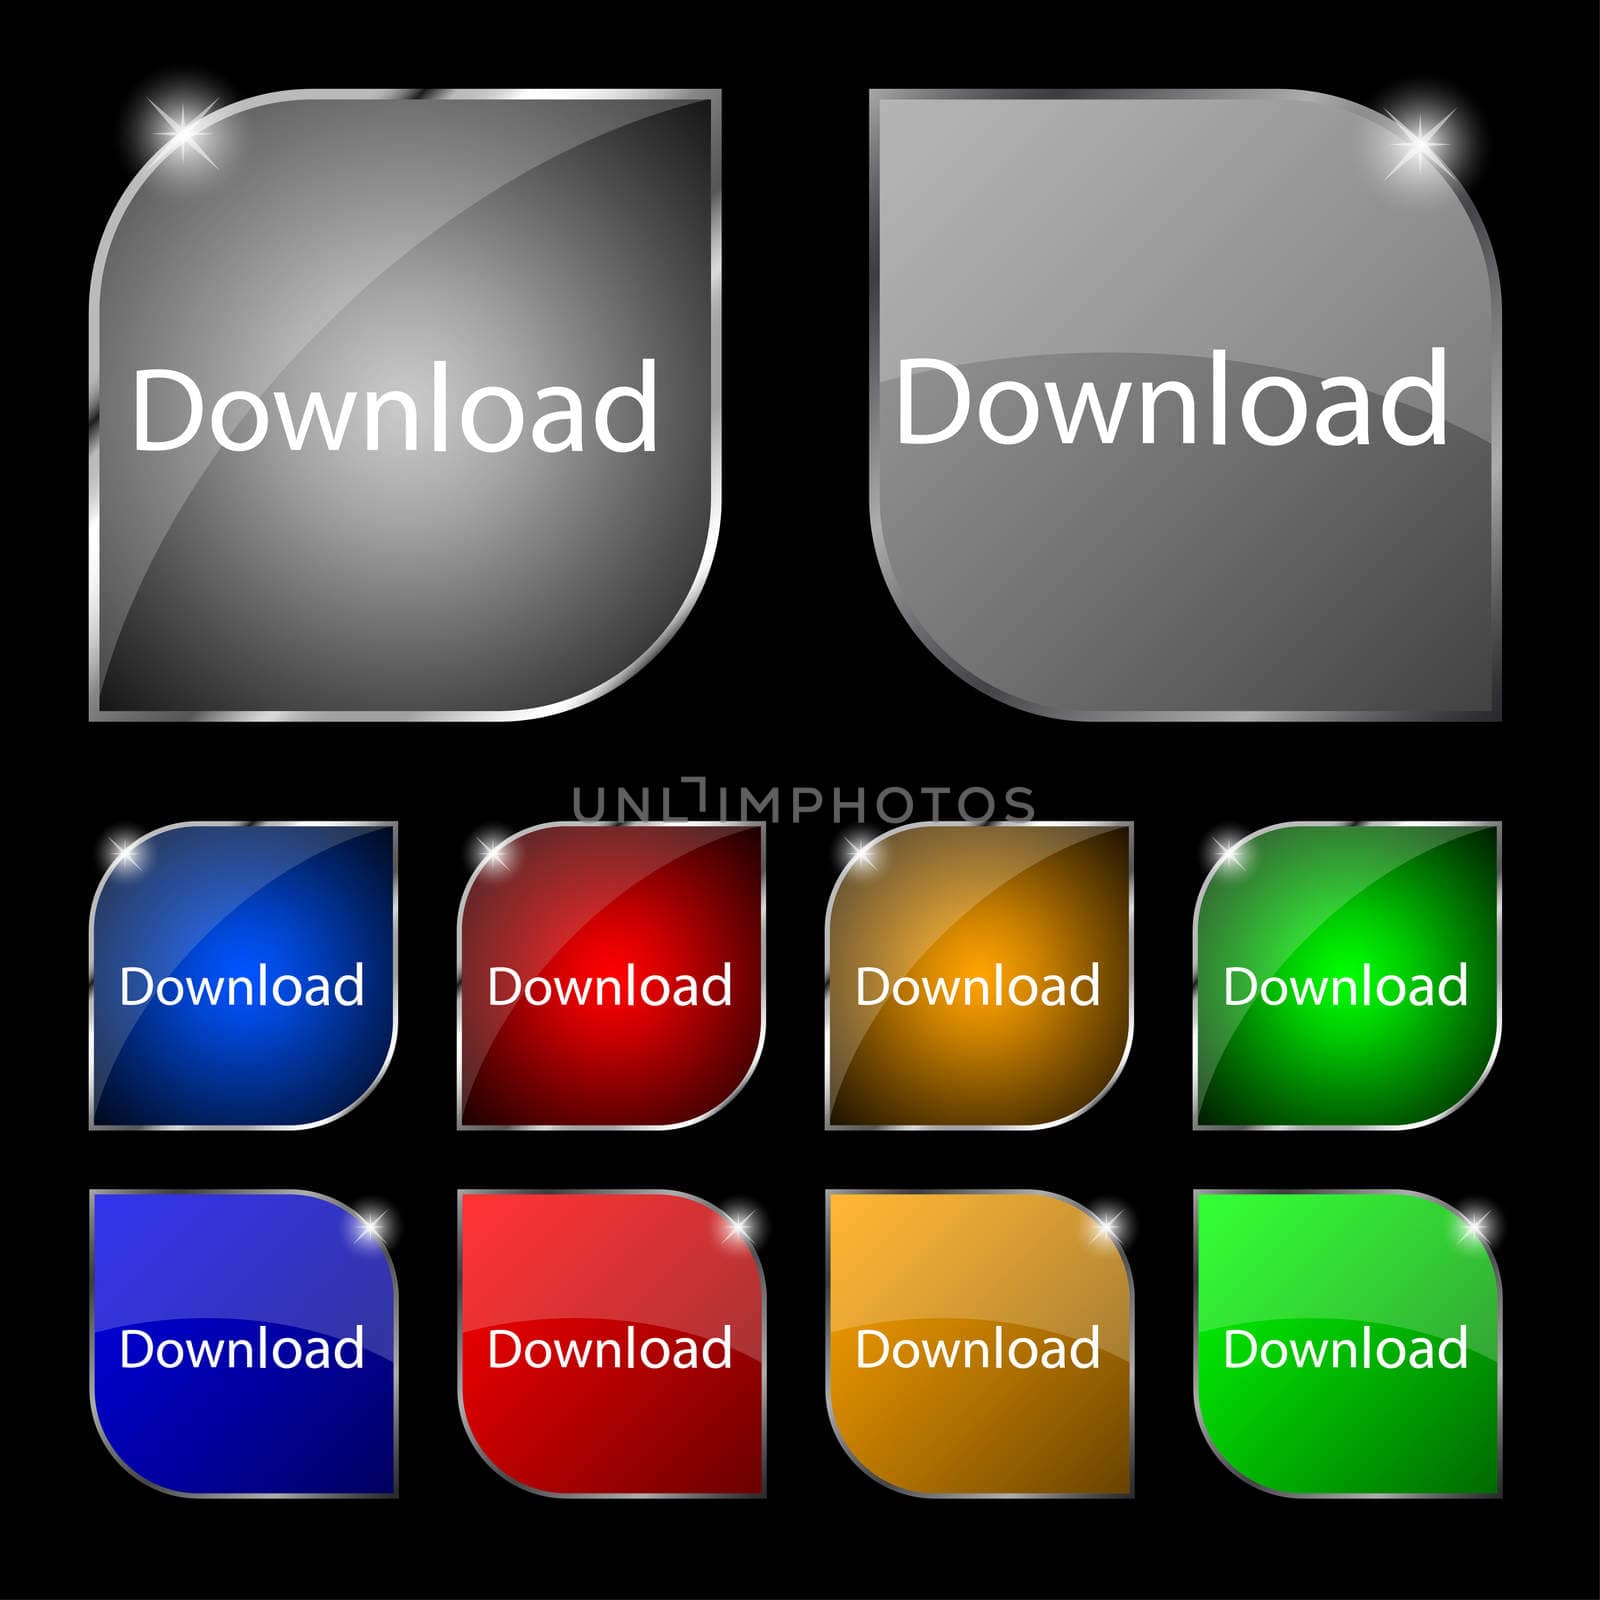 Download now icon. Load symbol. Set of colored buttons. illustration